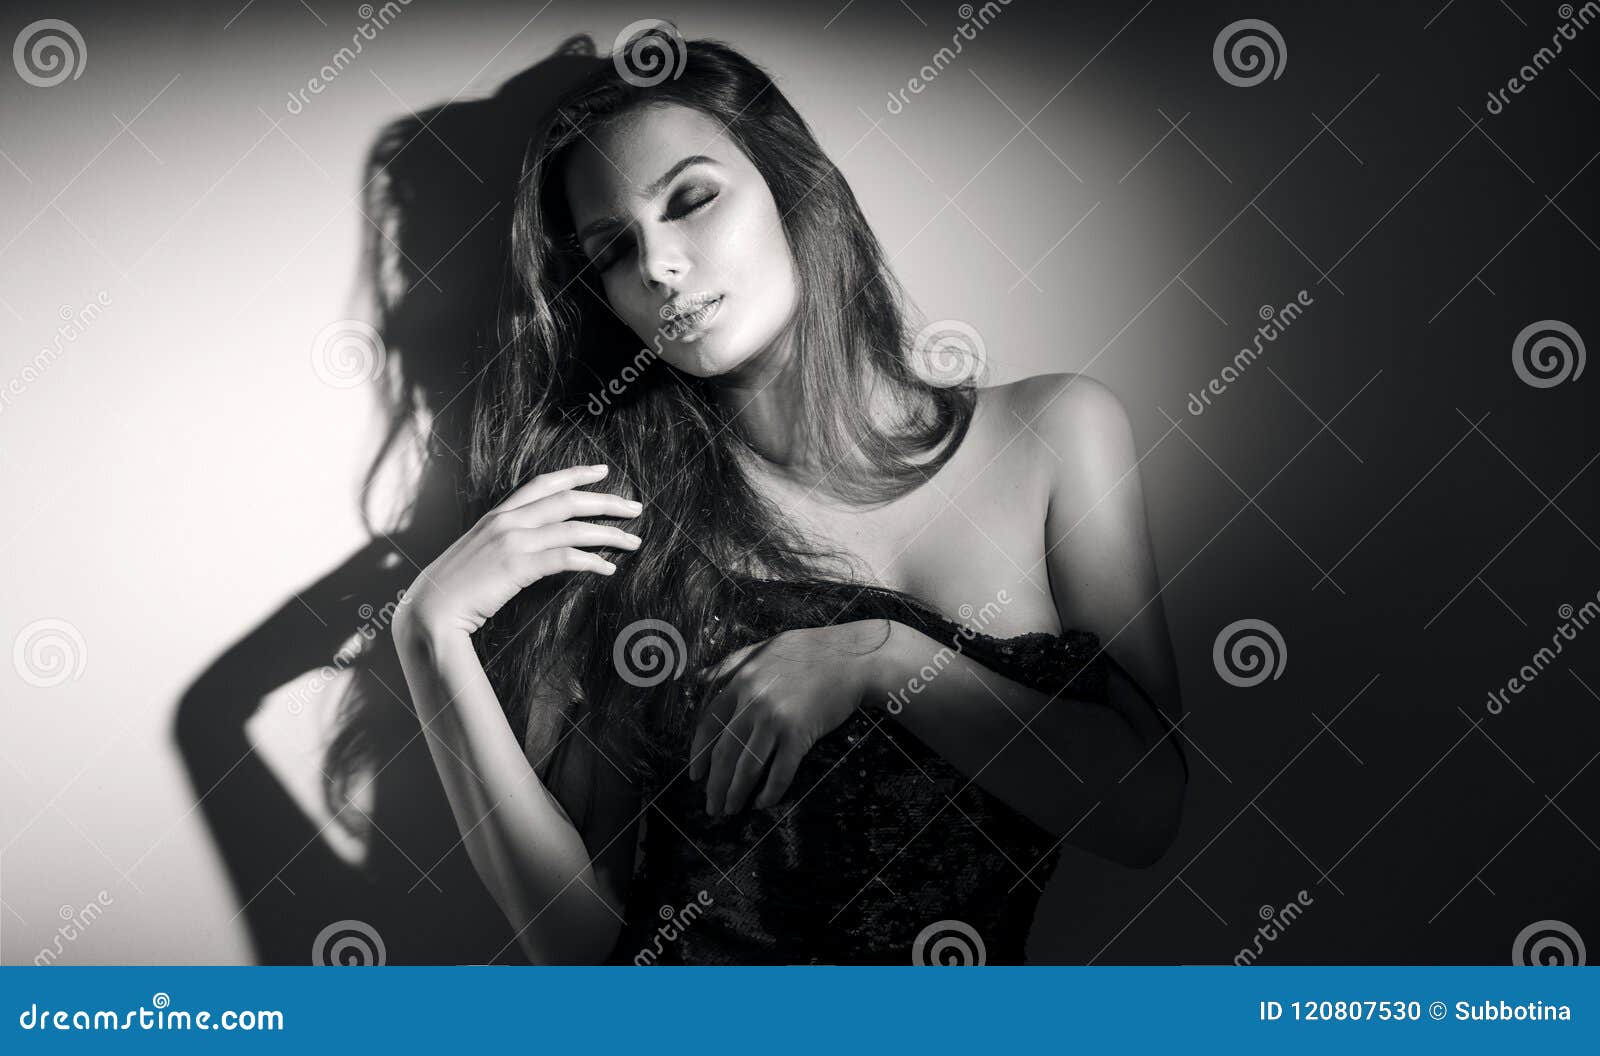 young woman black and white portrait. seductive young woman with long hair